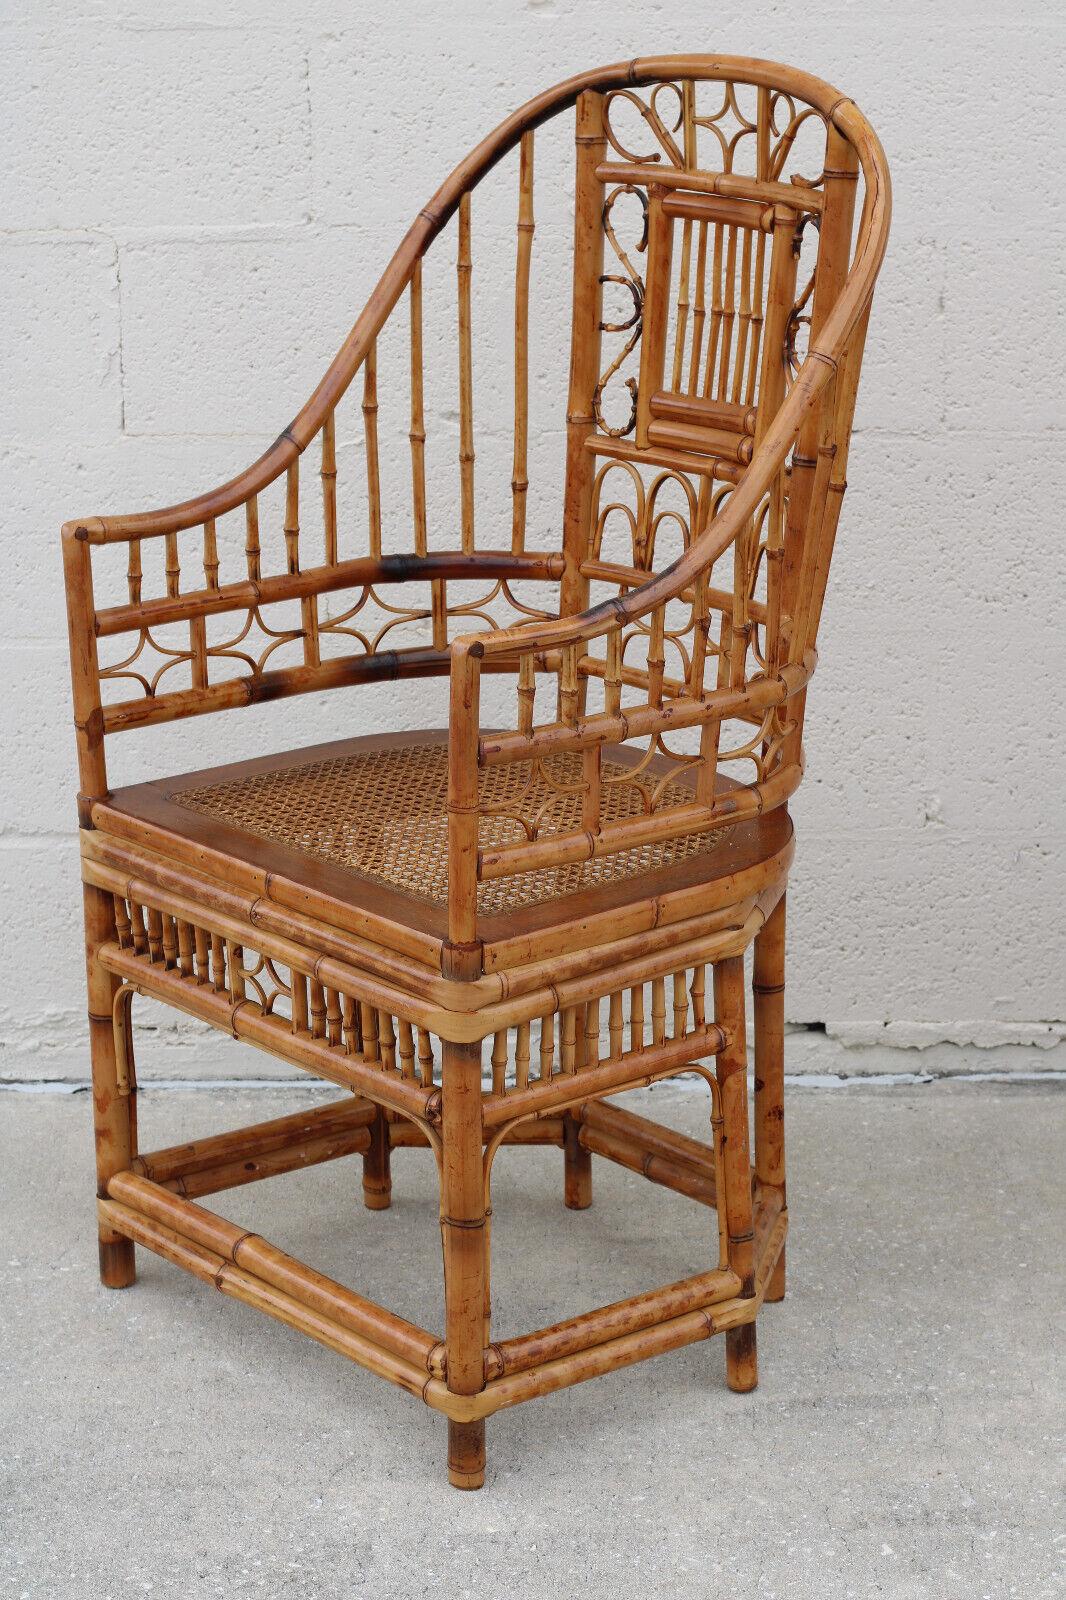 Fabulous pair of high back burnt bamboo armchairs with gracefully shaped horseshoe frames, in the Brighton Pavilion style. These tall beautifully handcrafted Chinese Chippendale chairs feature a tortoiseshell finish, caned-bottom seats, and